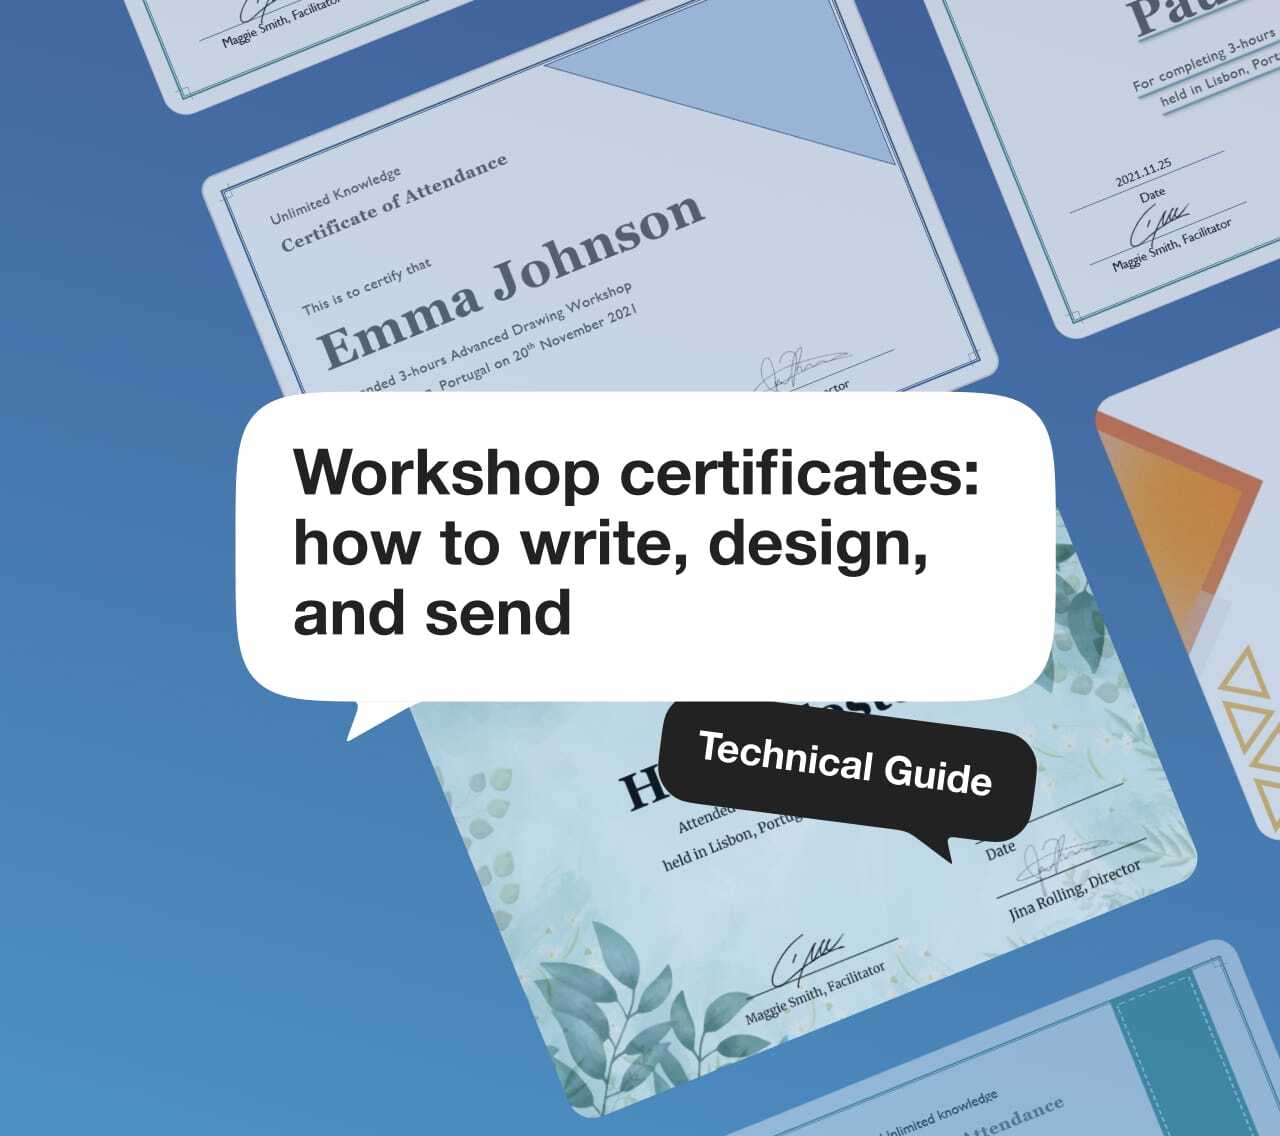 Find out how to create templates and issue certificates using commonly available tools